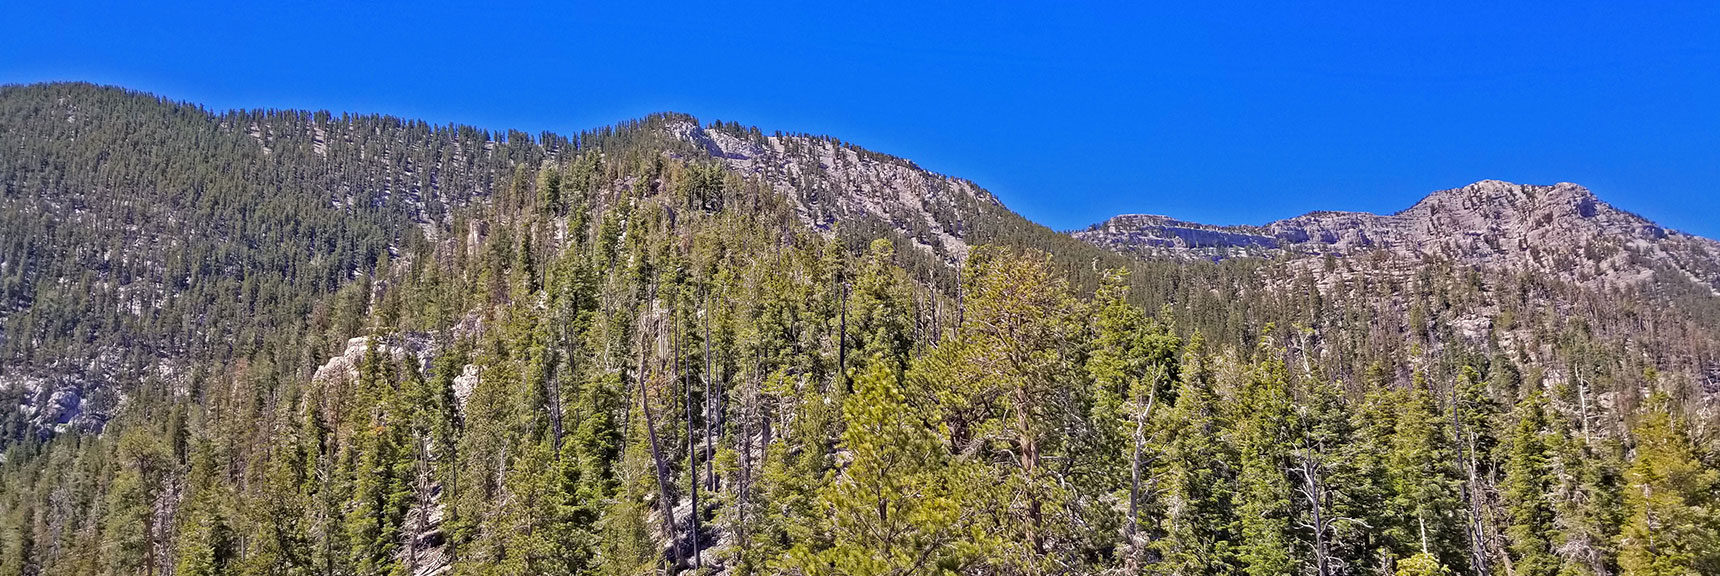 View Straight Up Mid Ridge to Summit Plateau (Center). Will Summit of Left Side. | Lee to Kyle Canyon | Gradual Mid Ridge Approach | Mt. Charleston Wilderness | Spring Mountains, Nevada